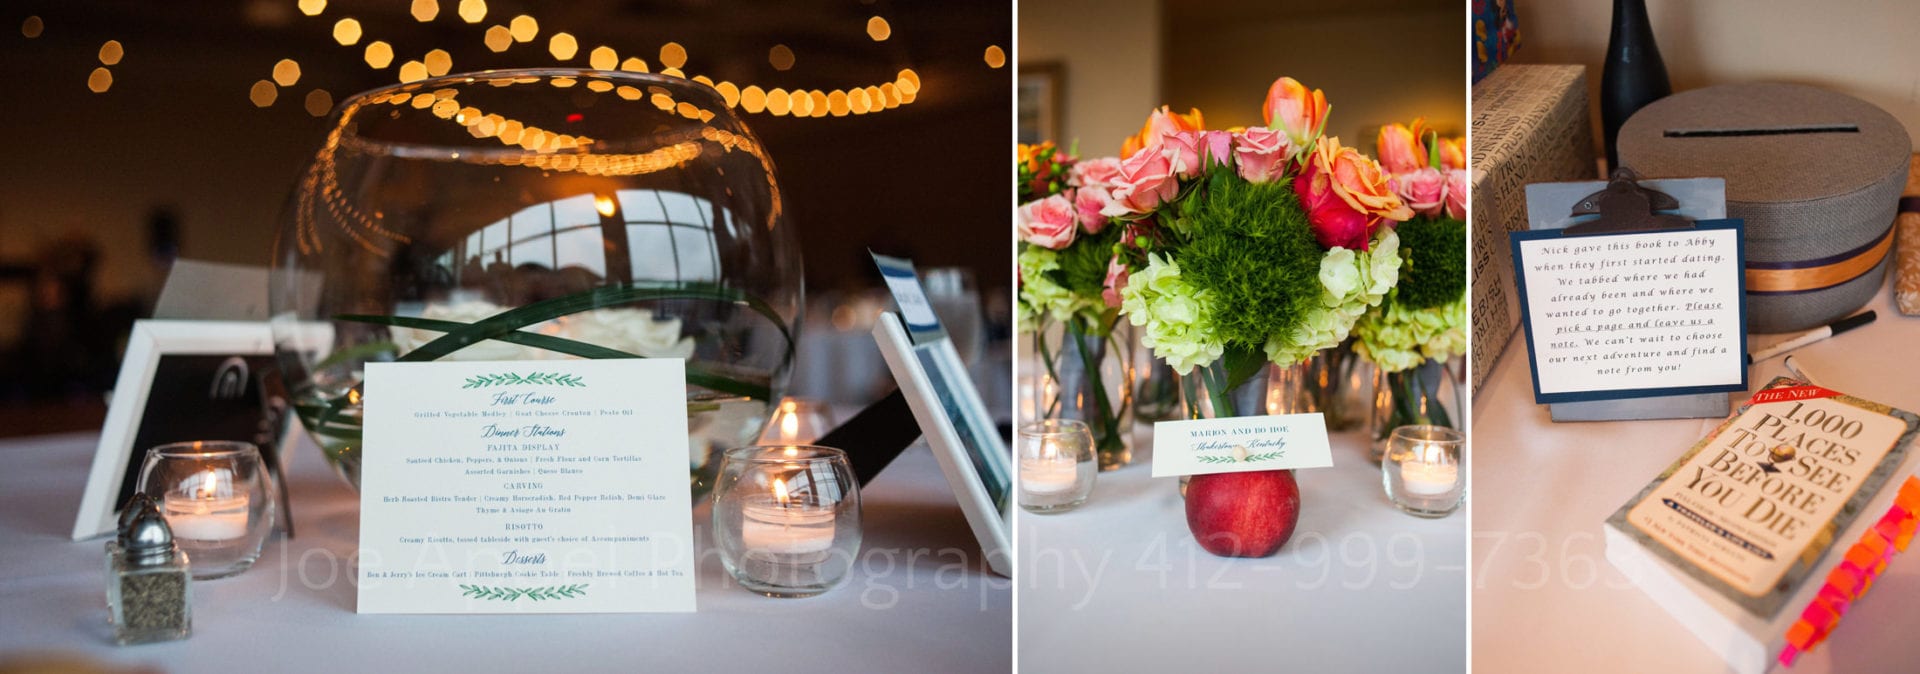 A menu card leans against a centerpiece made of a glass goldfish bowl with flowers, detail of a place card on a nectarine, and a travel guide with a sign asking guests to leave messages in it.